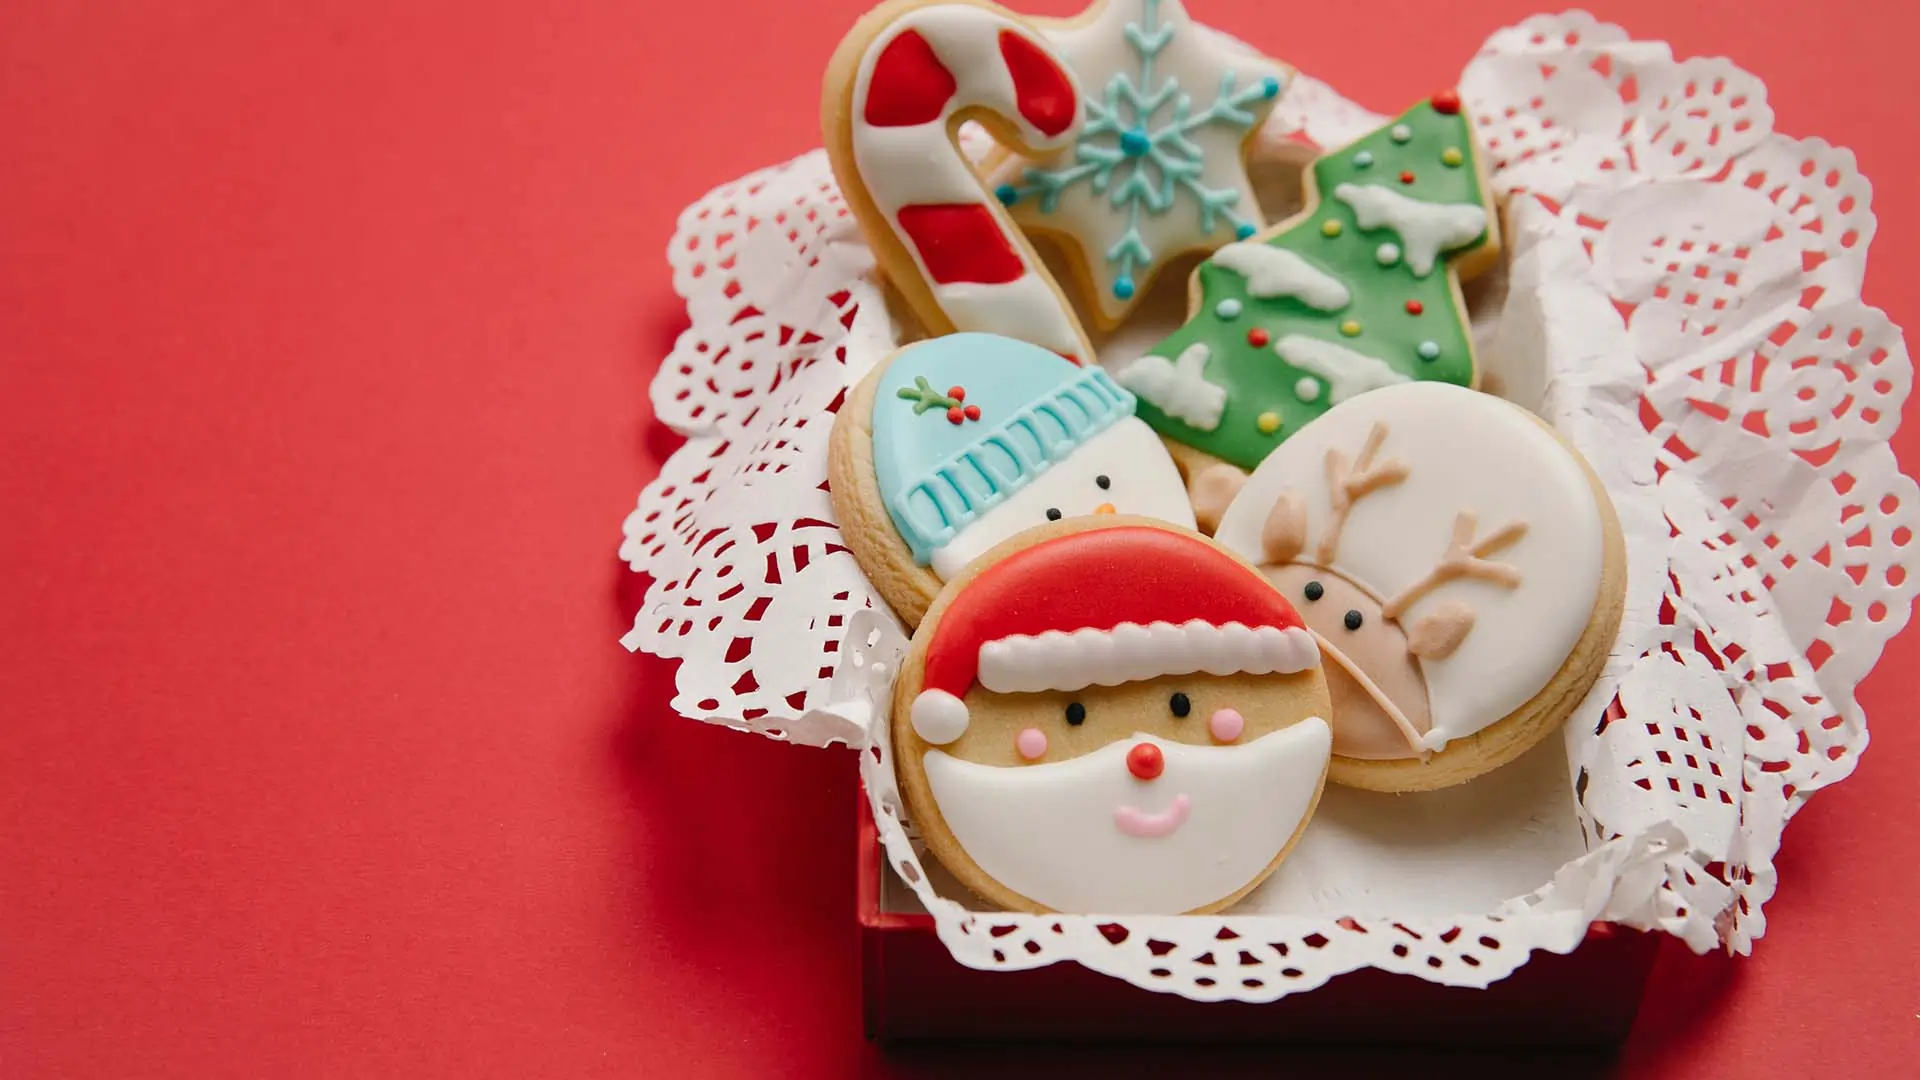 Basket of decorated holiday sugar cookies.